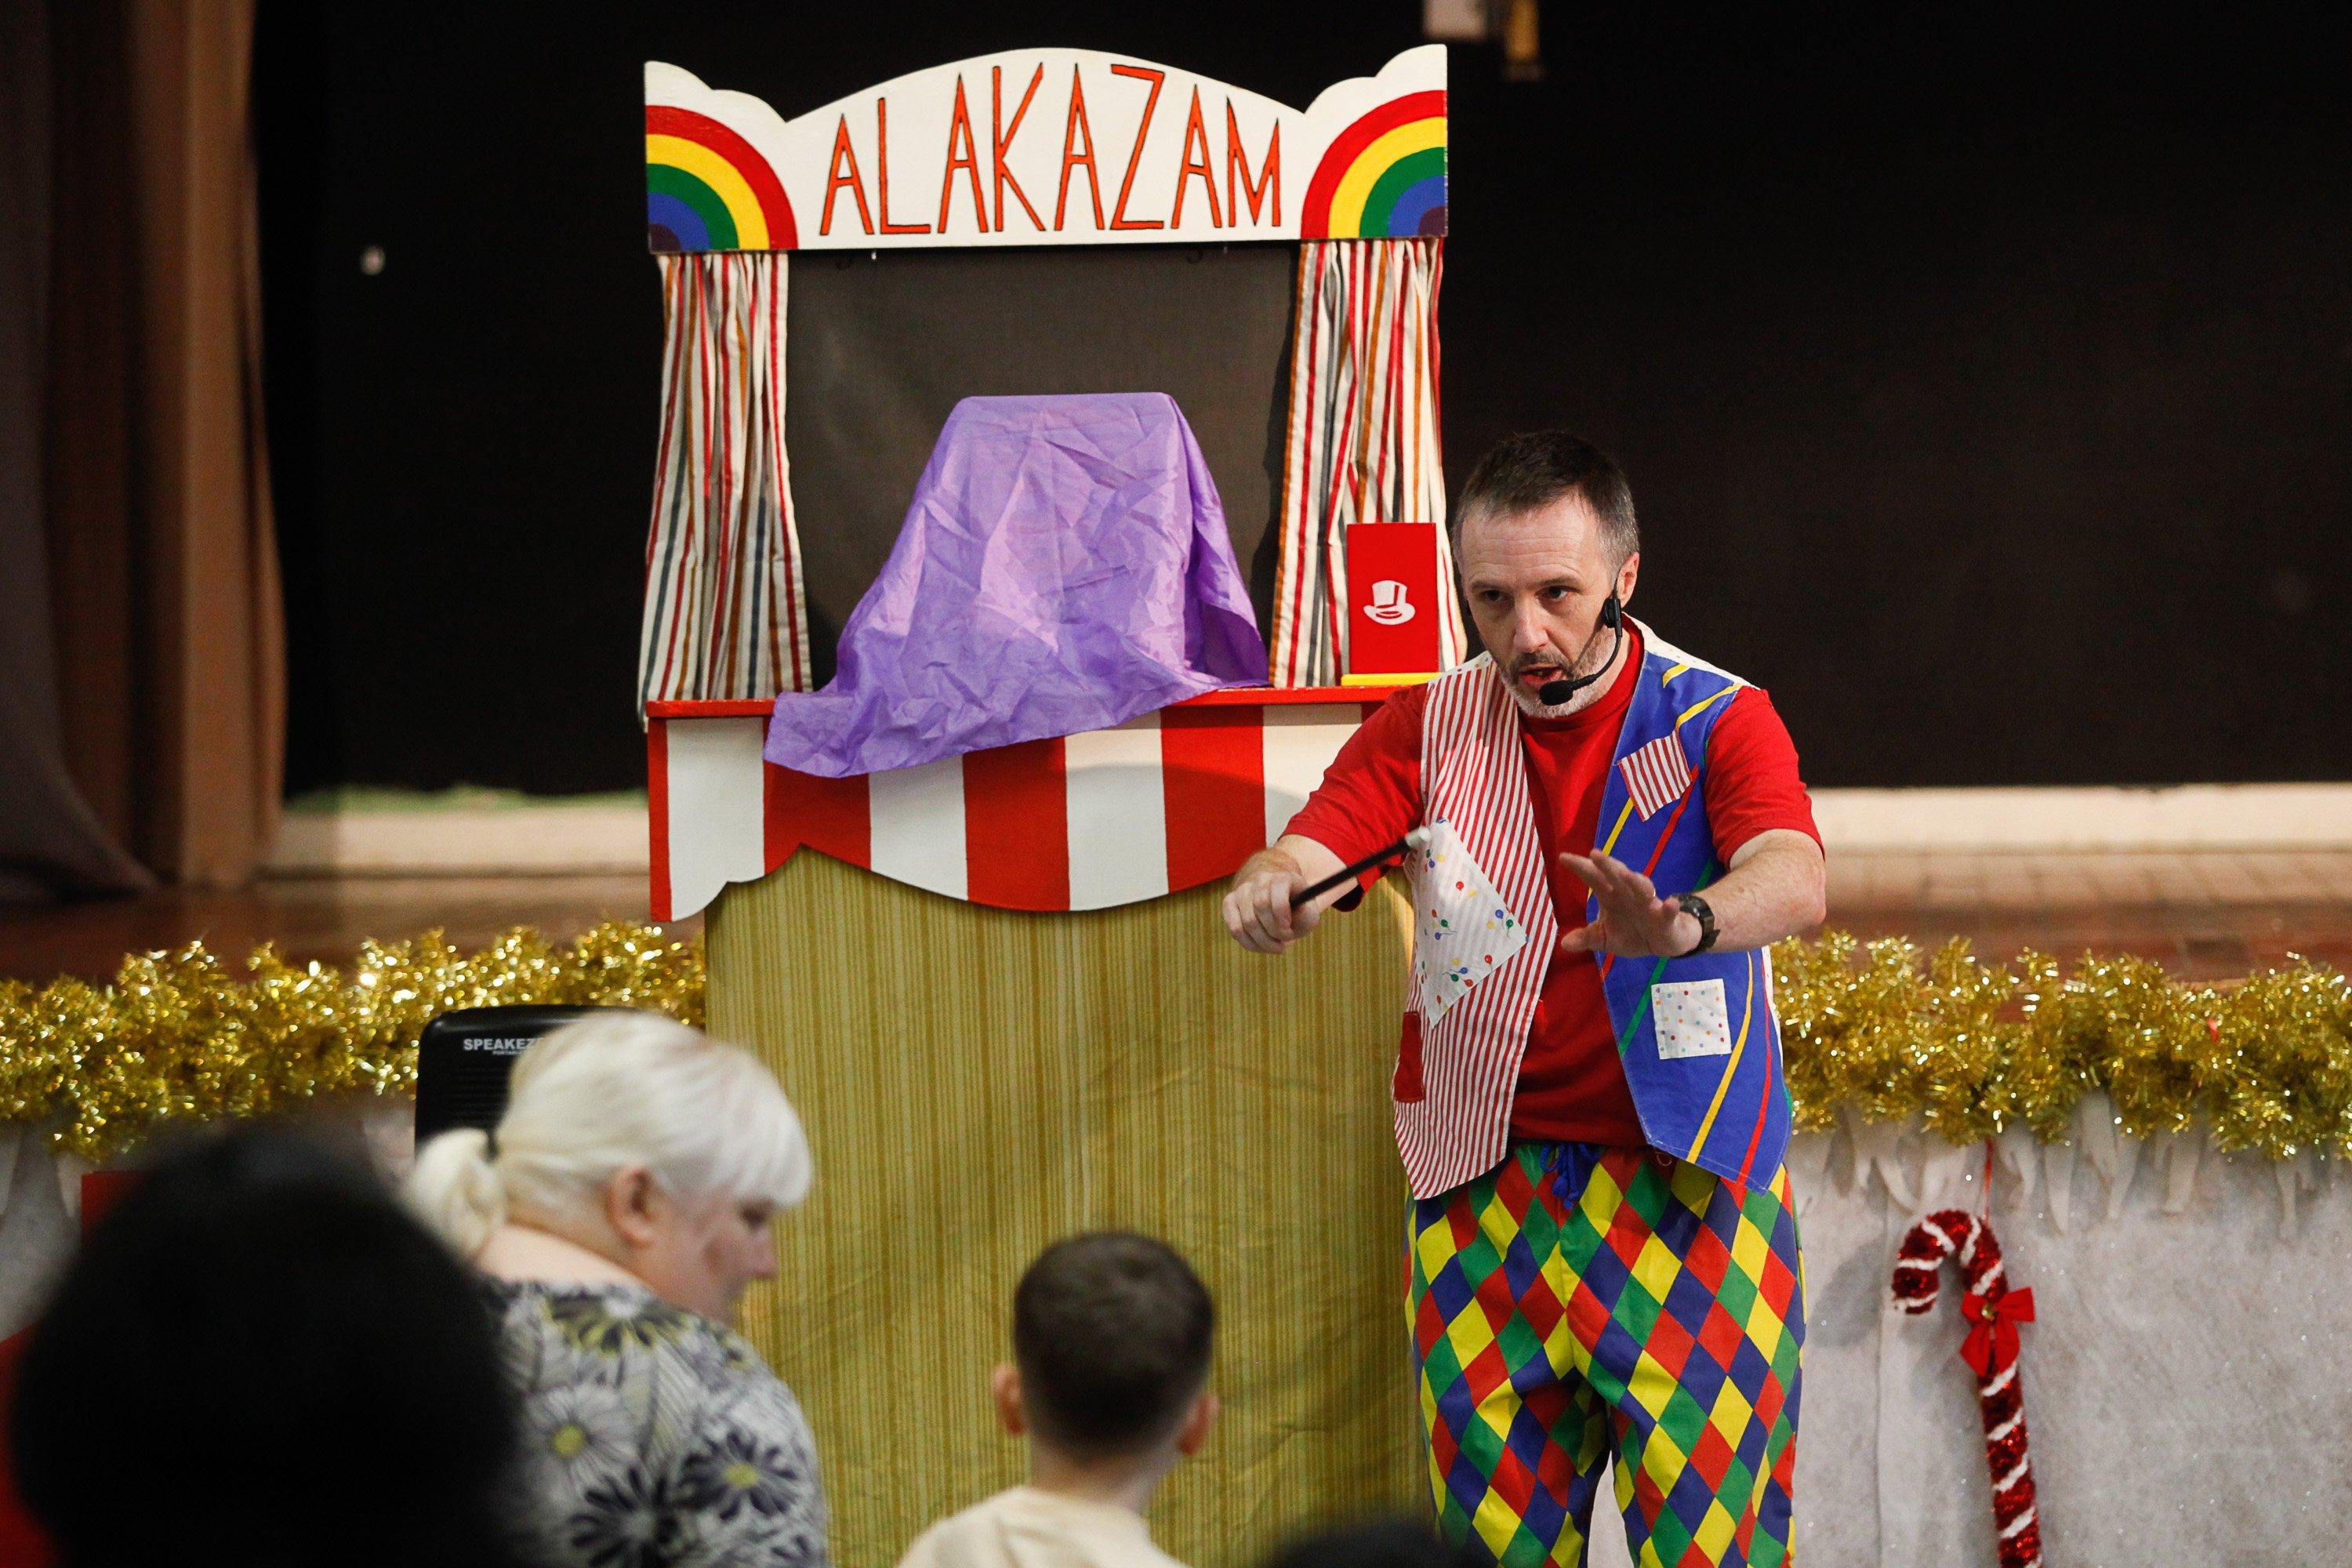 Camelon Winter Festival on Sunday, November 24. Magic show. Picture by Scott Louden.